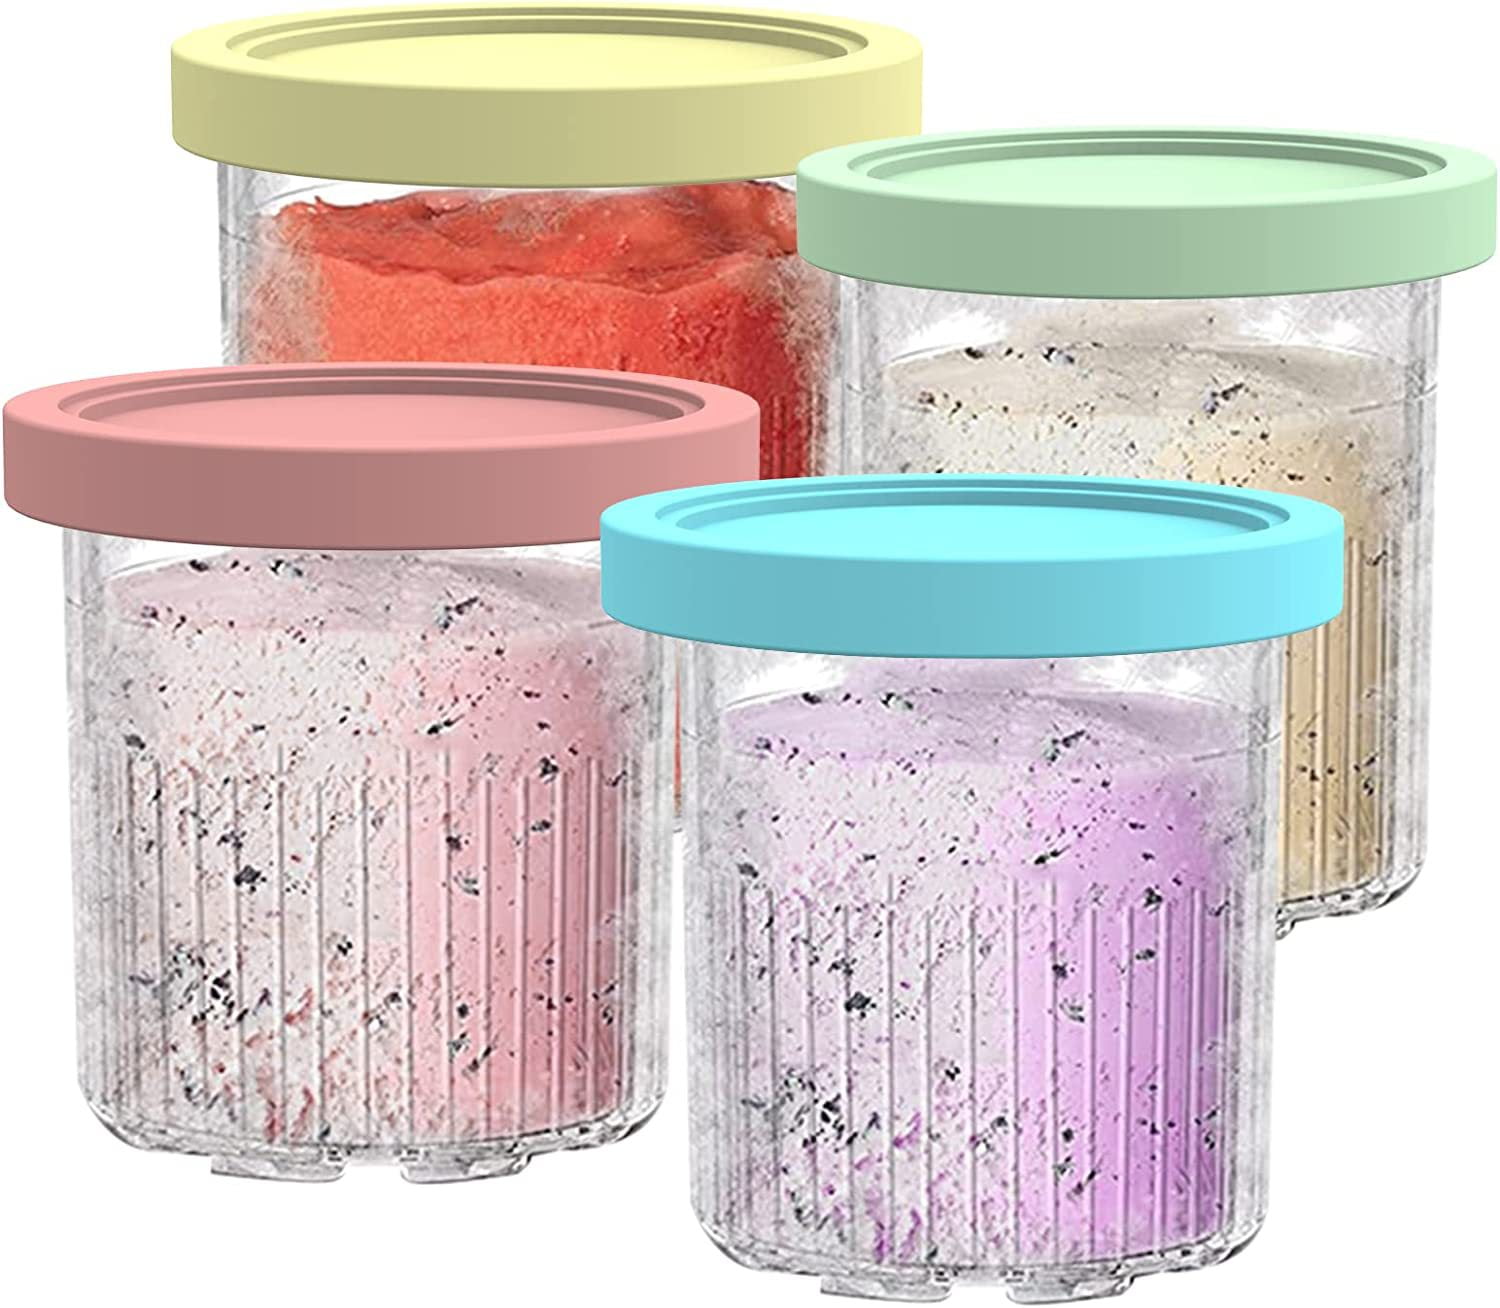  SLLFLY For Ninja Creami Deluxe Pints and Lids 4 Pack,Compatible  with Ninja 11-in-1 NC501 NC500 Series Creami Deluxe Ice Cream Maker,24oz  NC501 Ninja Creami Deluxe XL Cups(Blue,Pink,Grey,Green): Home & Kitchen